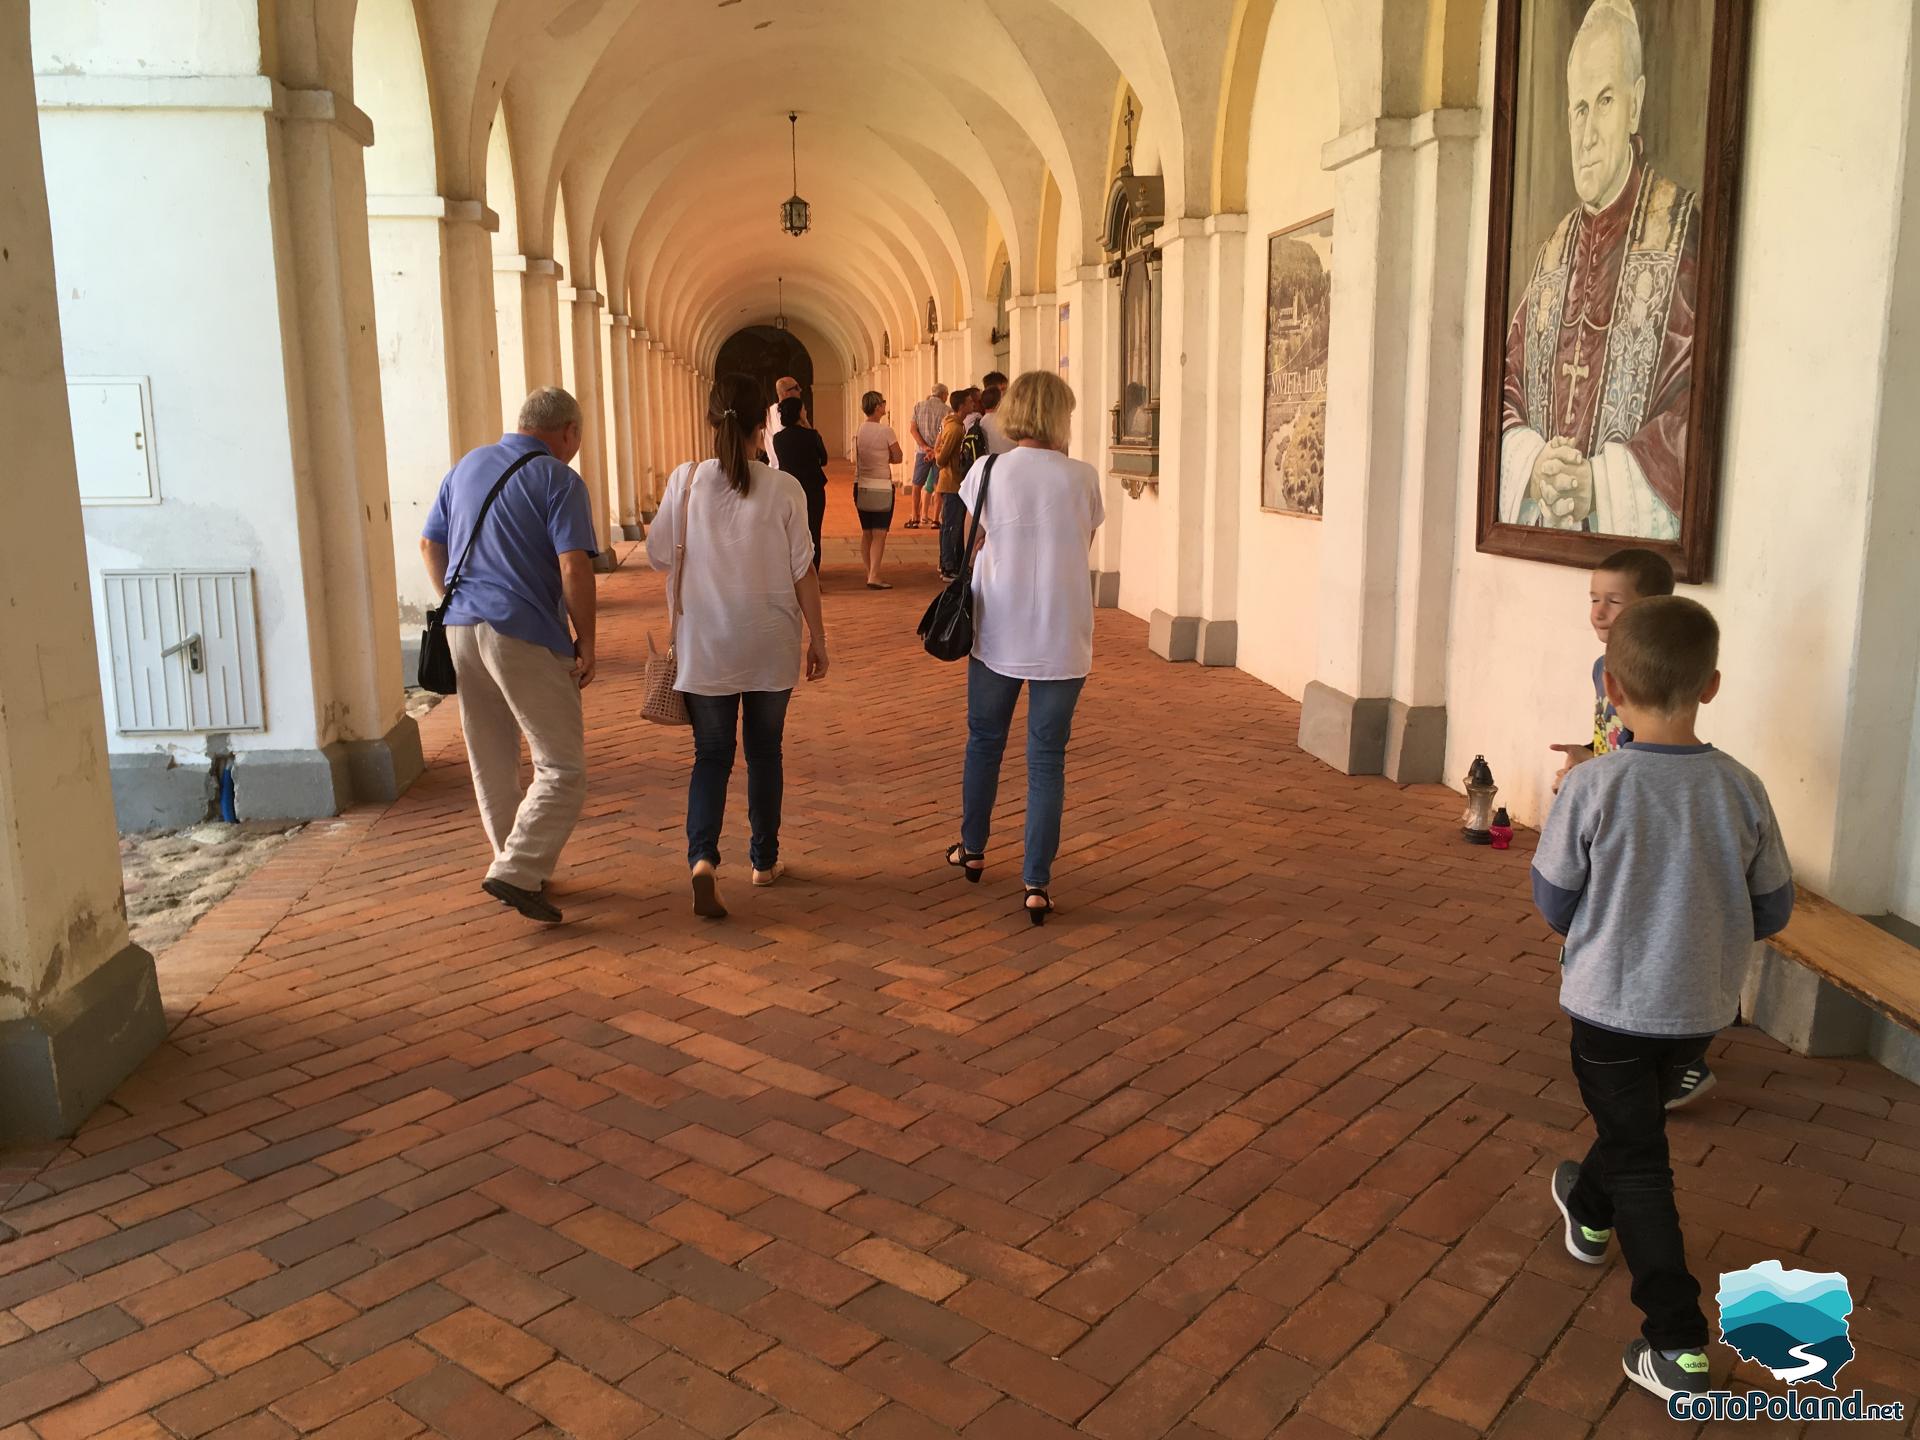 people walking in the cloisters